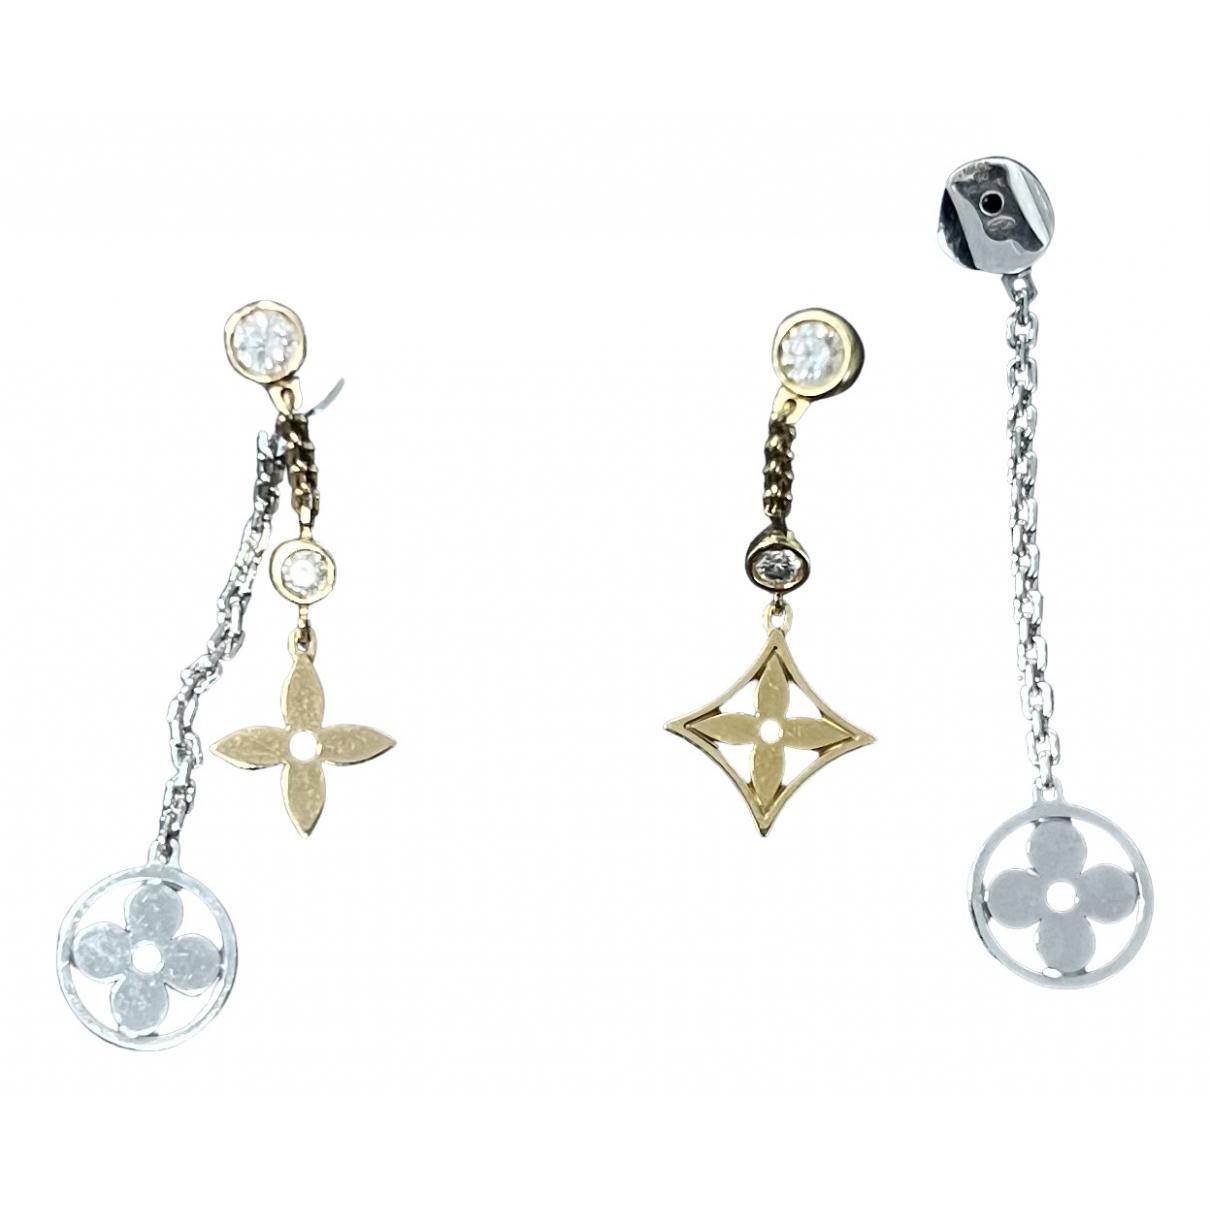 LOUIS VUITTON Color Blossom Earrings Yellow Gold, White Gold And Pavã Diamond . Size Nsa